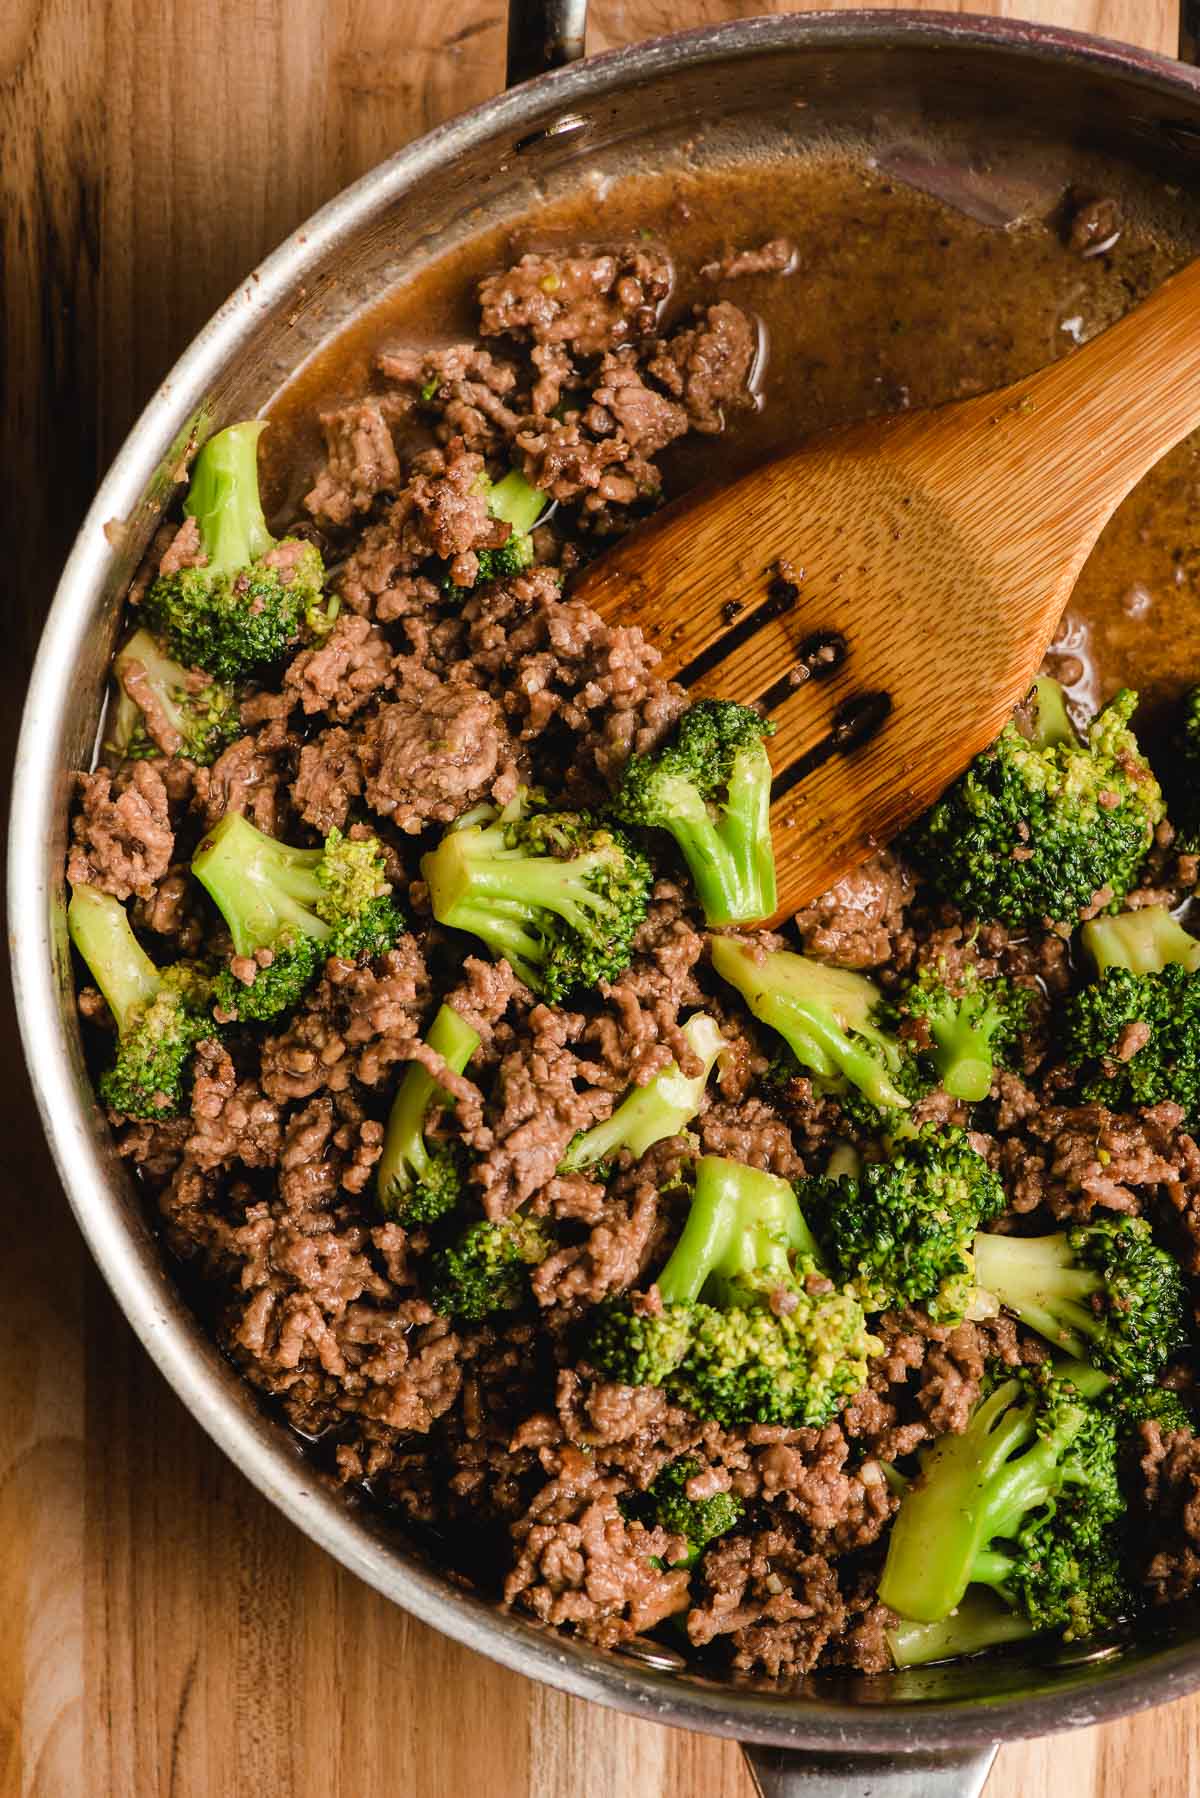 Wooden spatula scooping ground beef and broccoli.